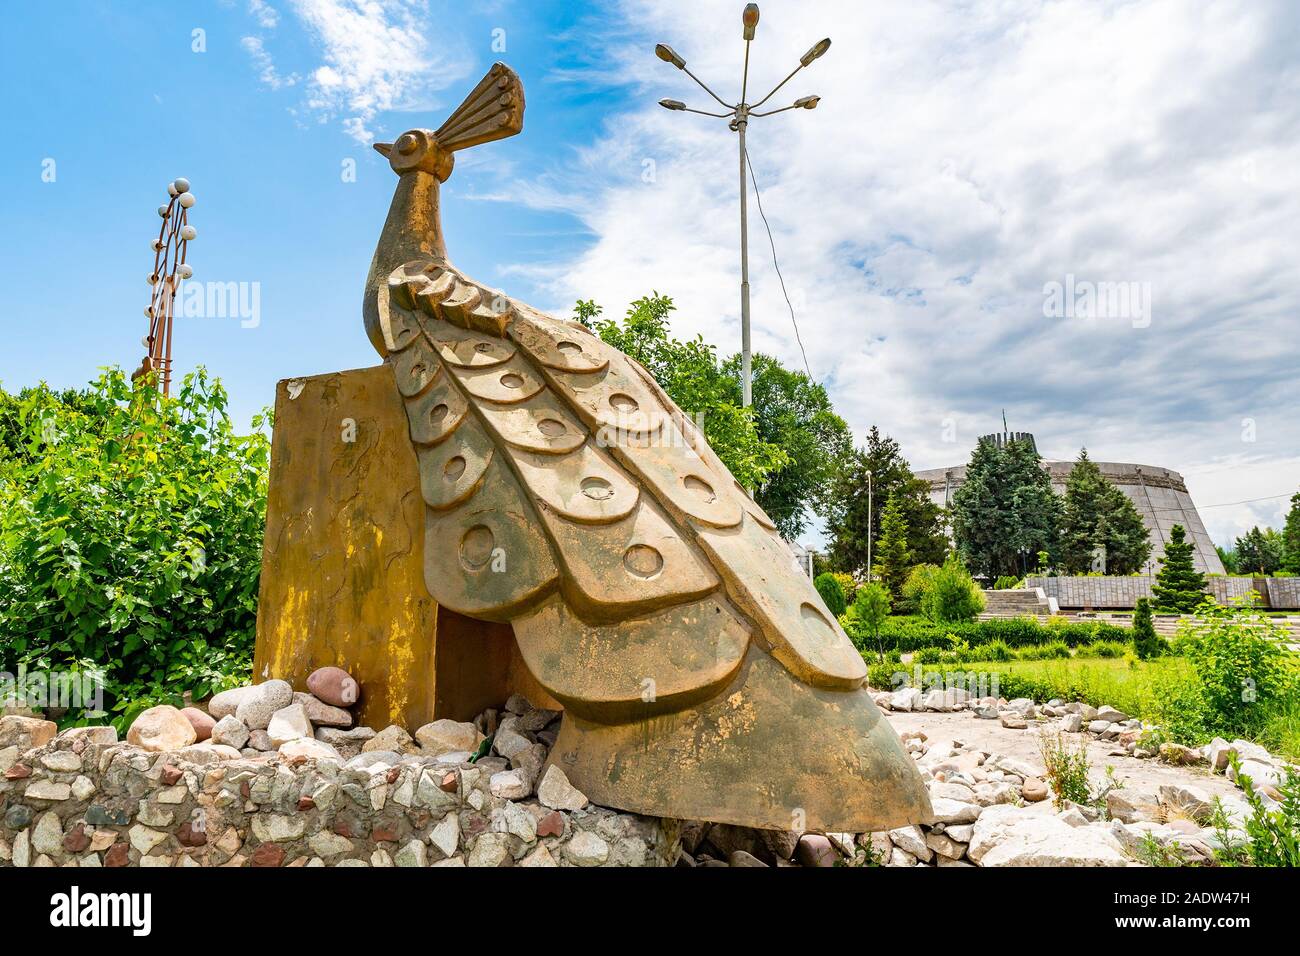 Dushanbe Concert Complex Kokhi Borbad Picturesque View of a Peacock Statue at Park on a Cloudy Rainy Day Stock Photo